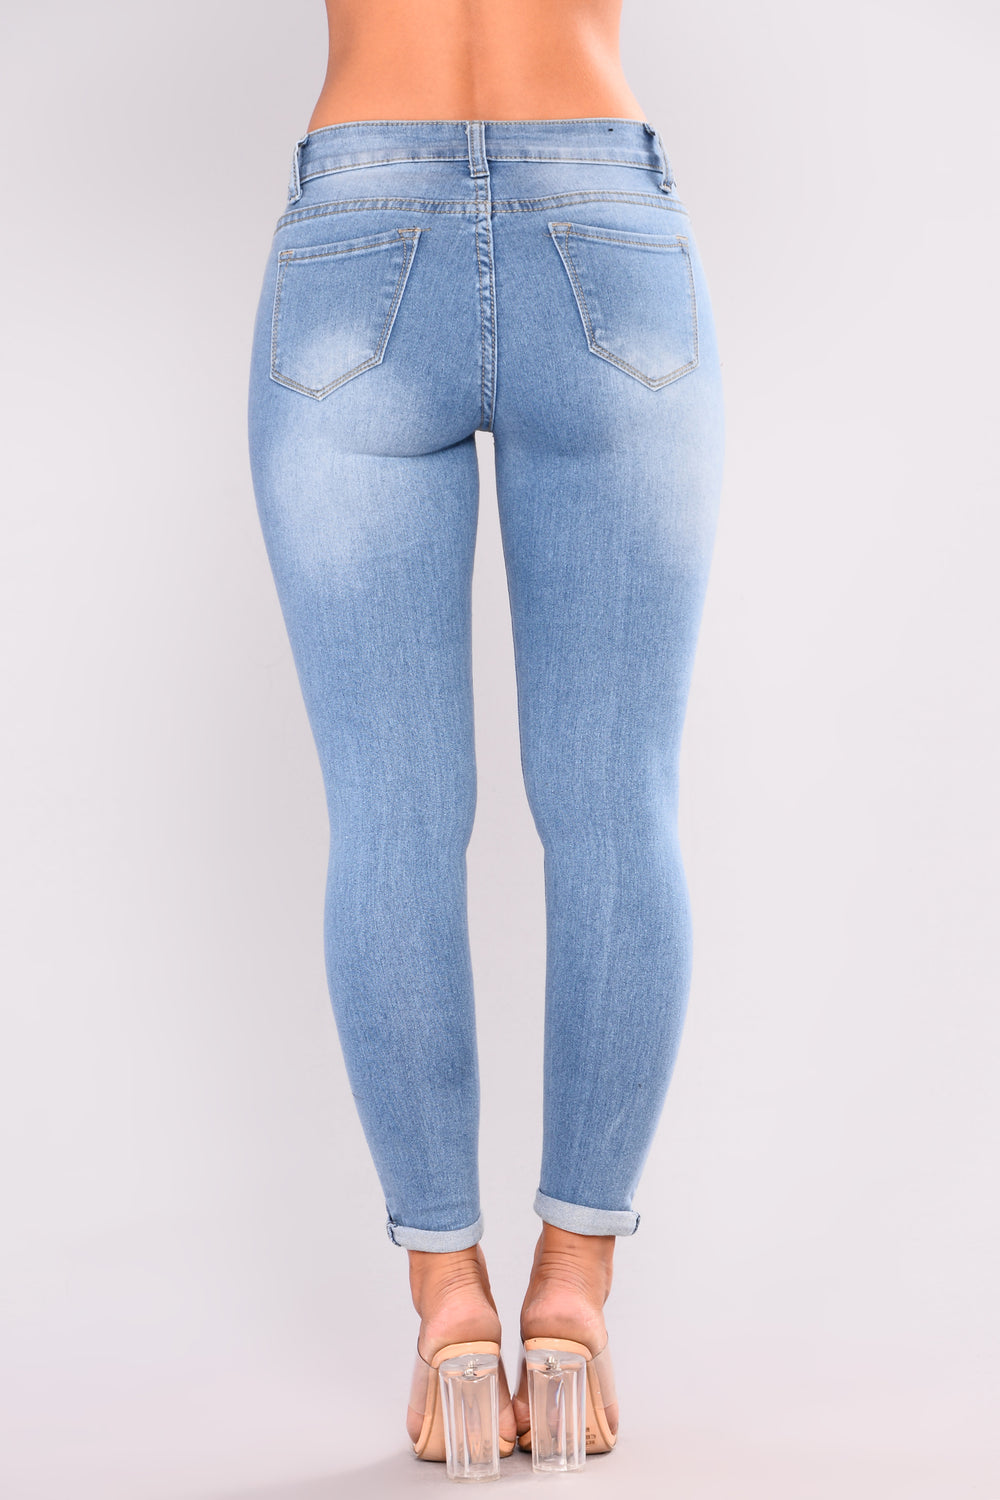 New Baby Blues Ankle Jeans - Light Blue Wash